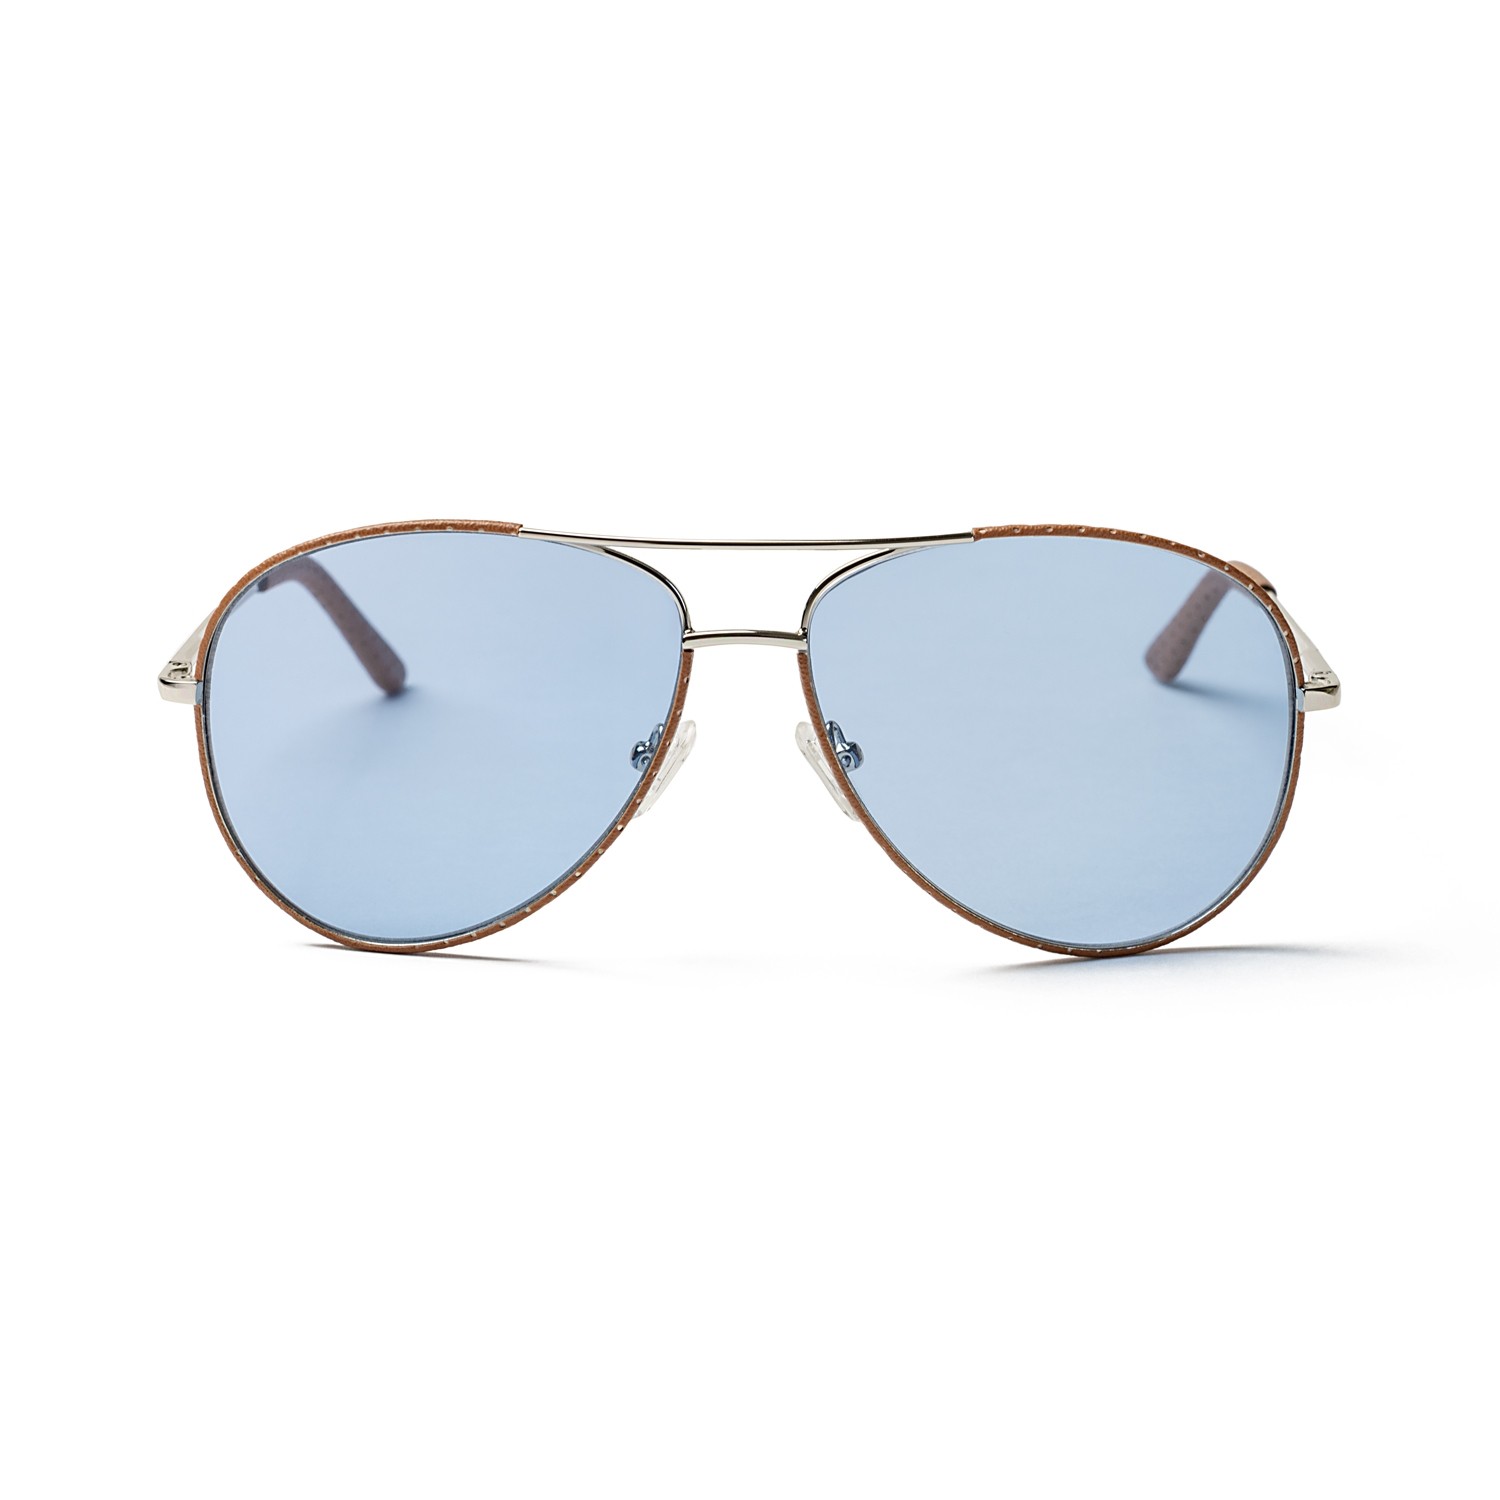 FIENNES SILVER FRAME AND BLUE LENS